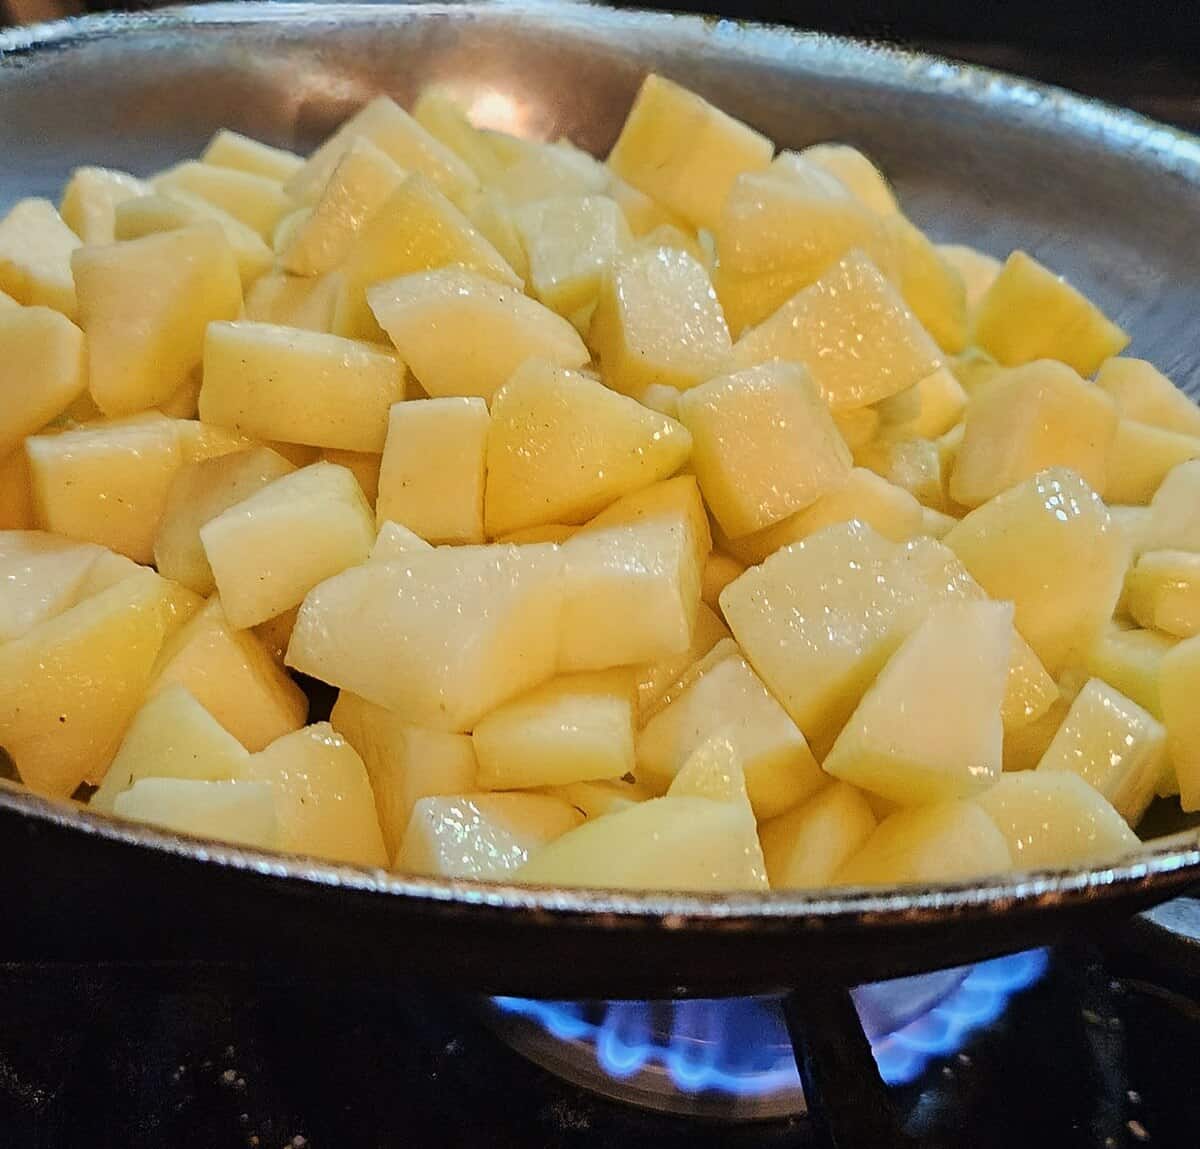 chunks of apple in a skillet cooking over a high flame